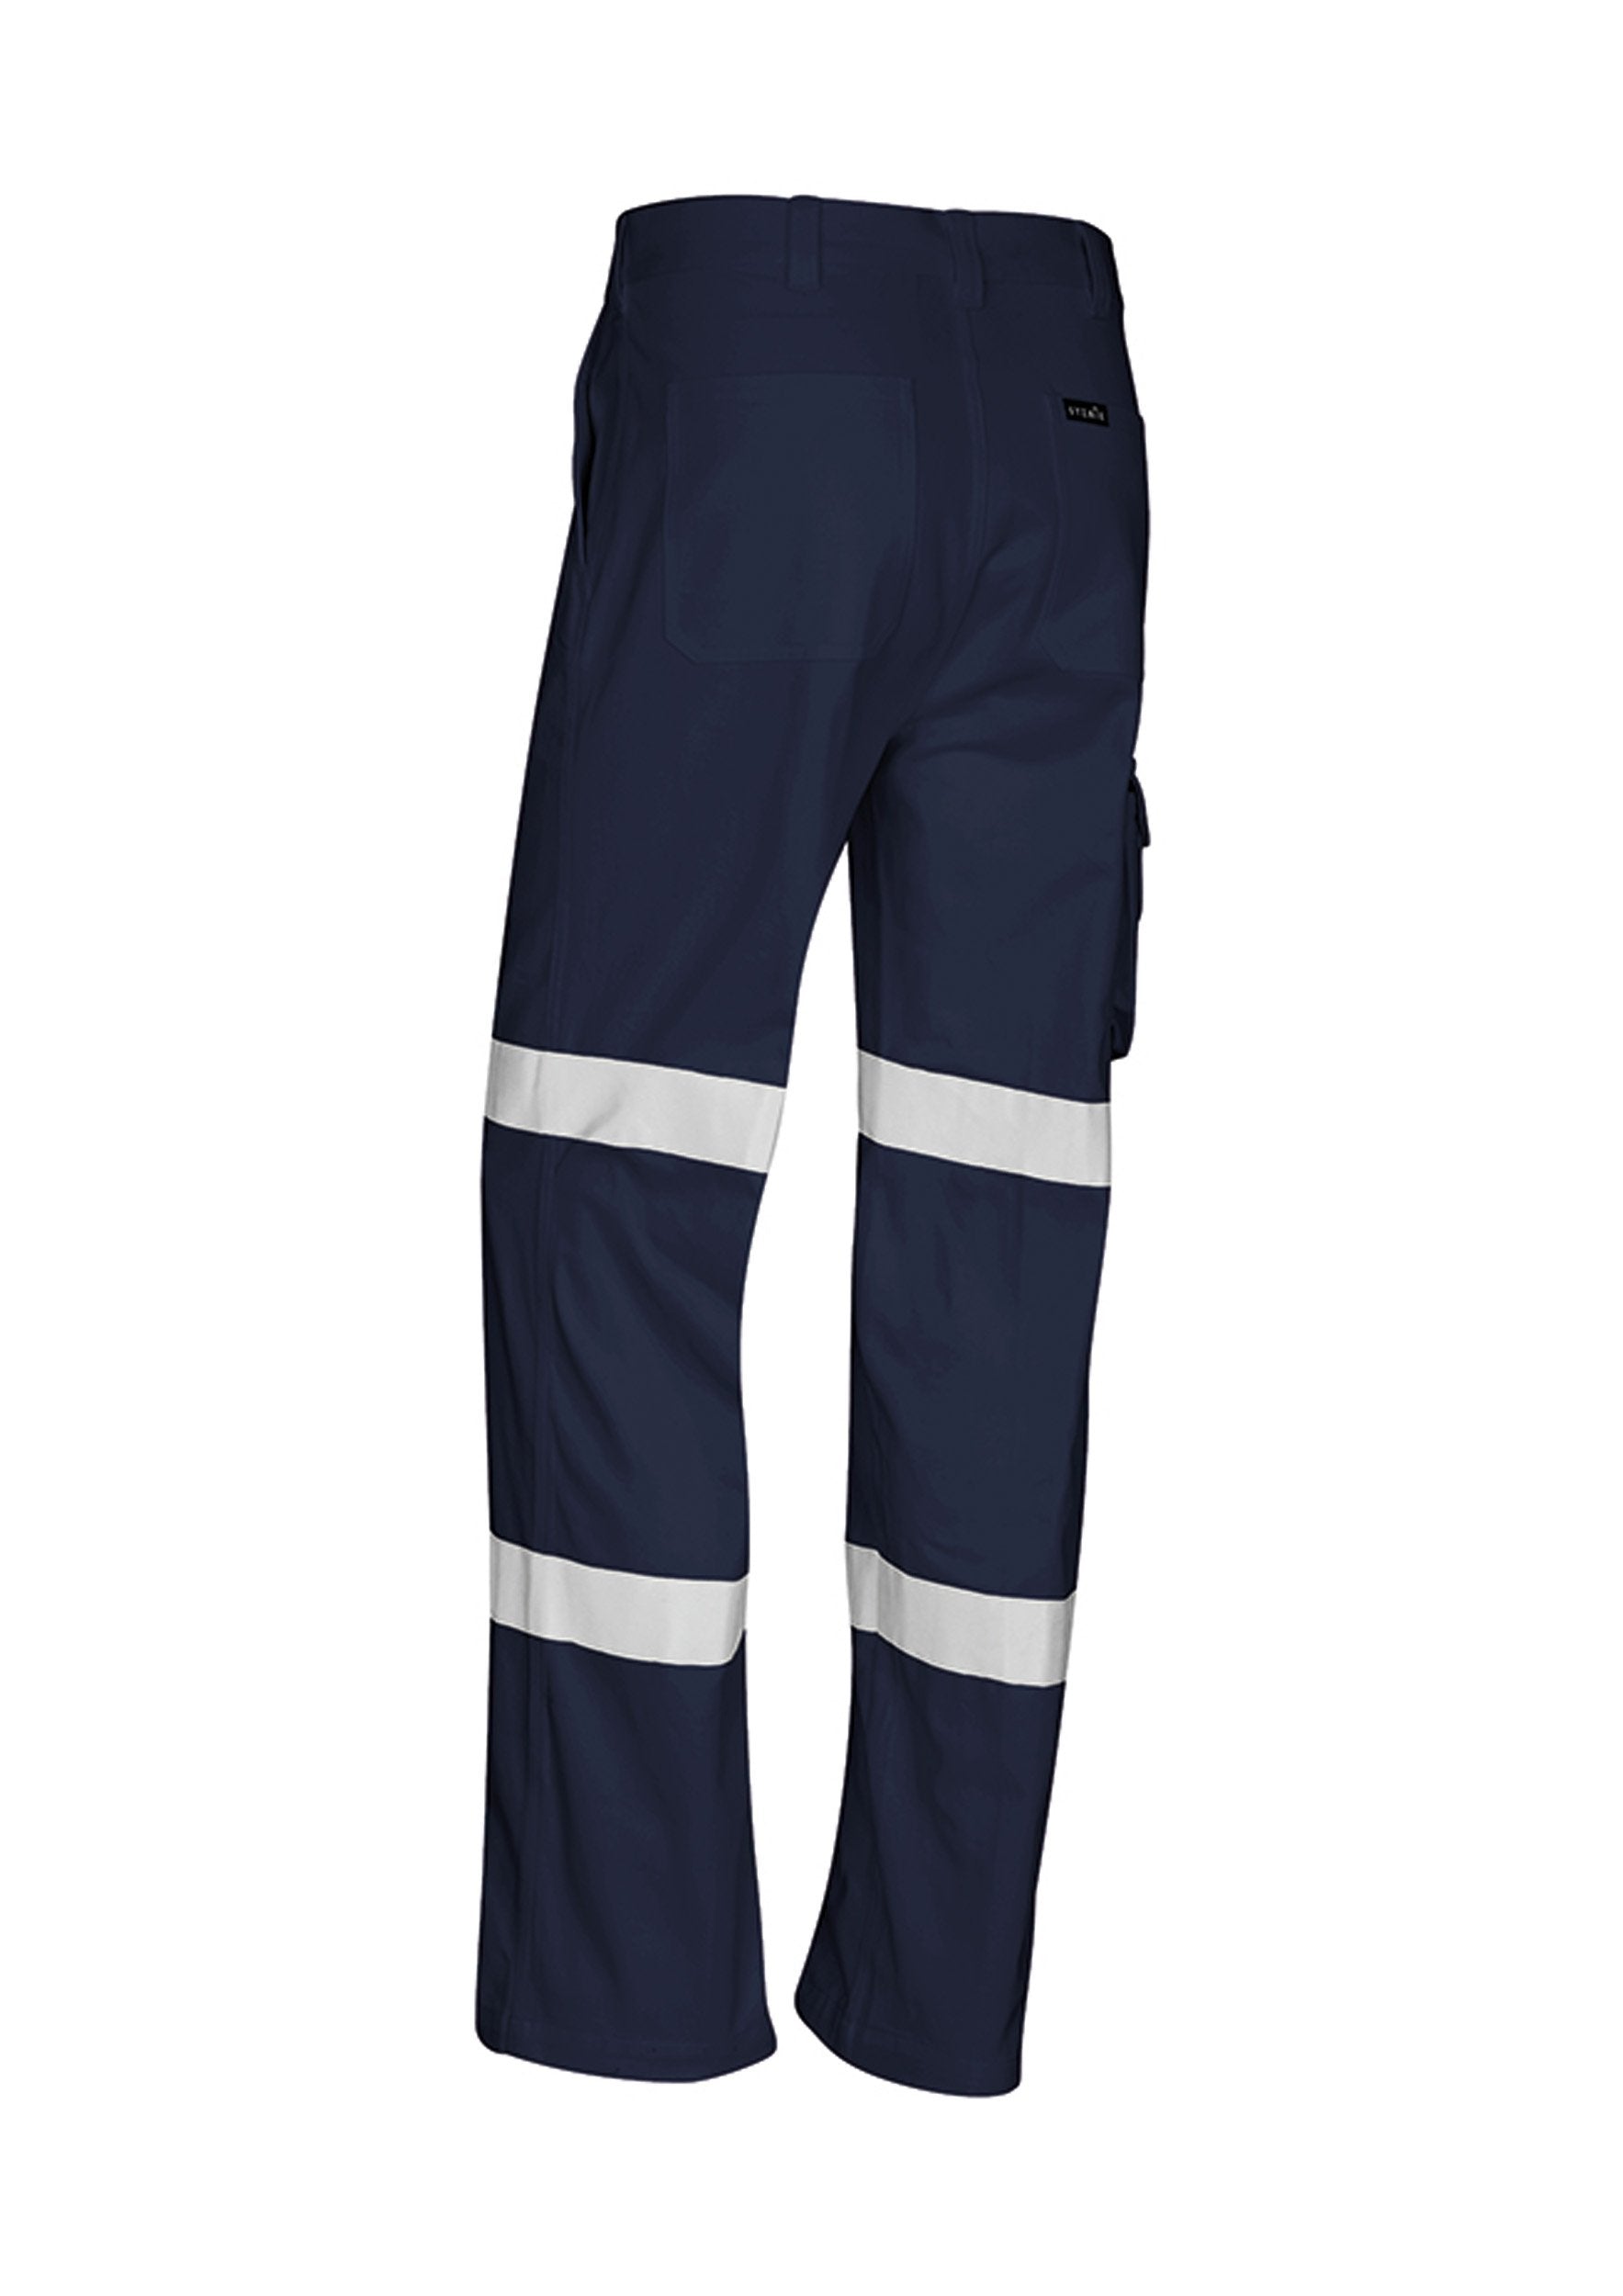 Mens Bio Motion Taped Pant (Stout) ZP920S Work Wear Syzmik Navy only 87S 